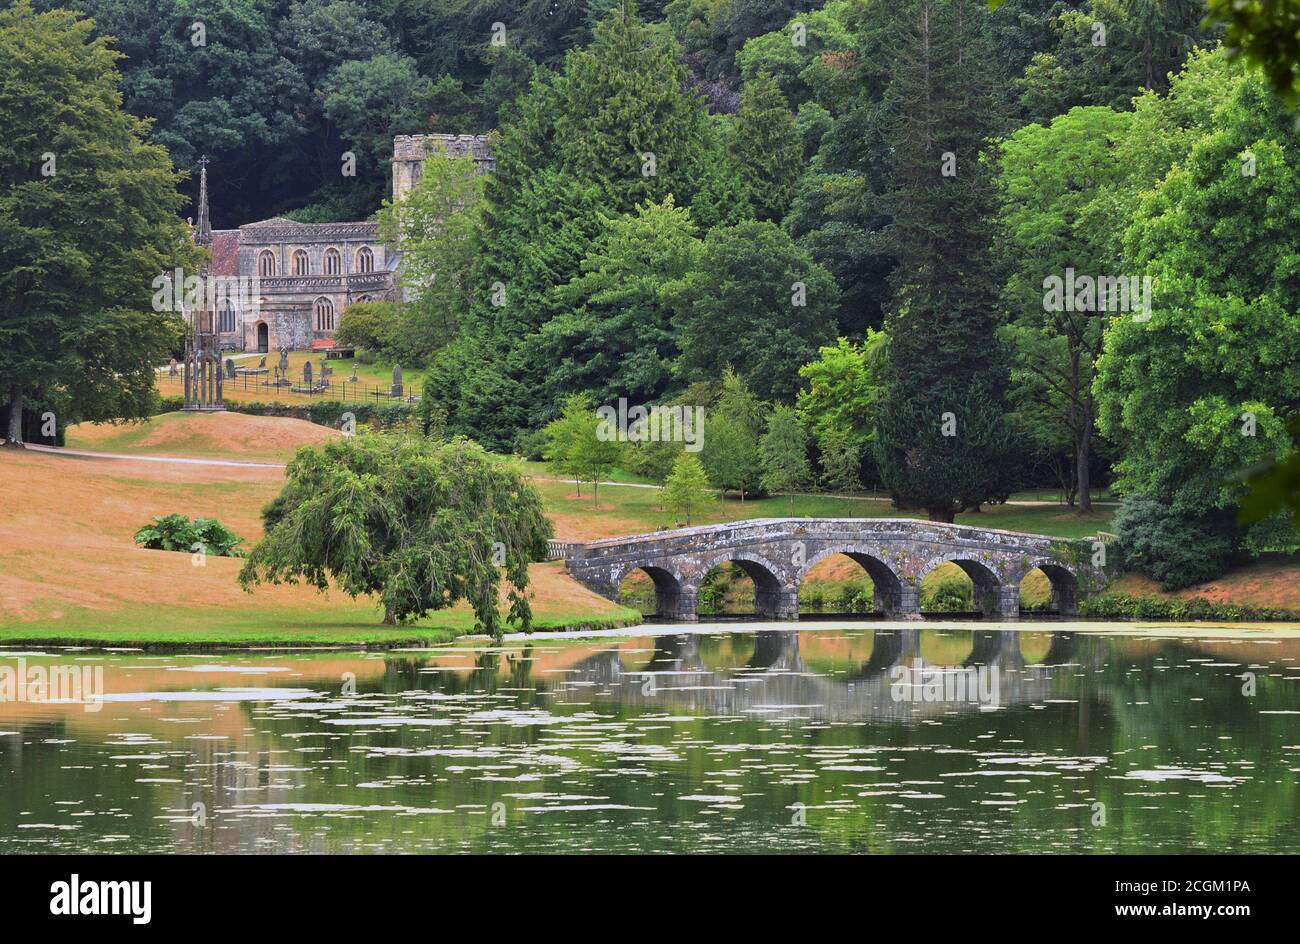 St Peter's Church, the Bristol High Cross and the Palladian Bridge viewed from across the lake on the Stourhead Estate, near Mere, Wiltshire, England Stock Photo